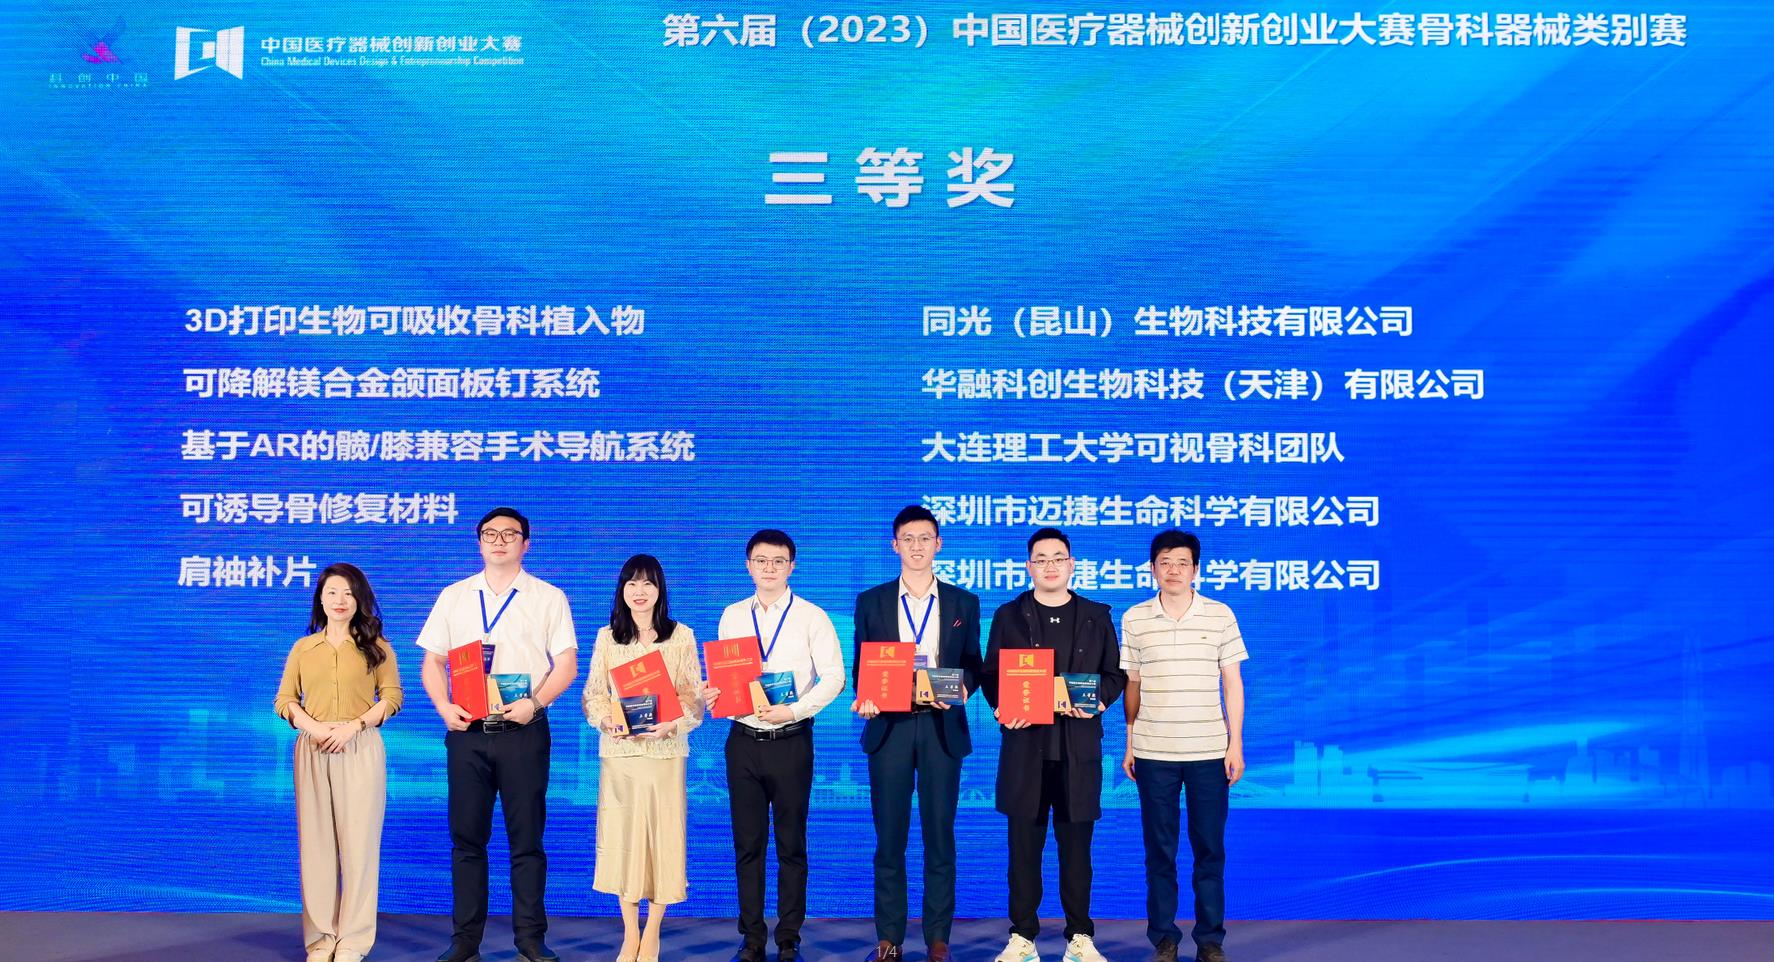 Won the third prize in the 6th China Medical Device Innovation and Entrepreneurship Competition